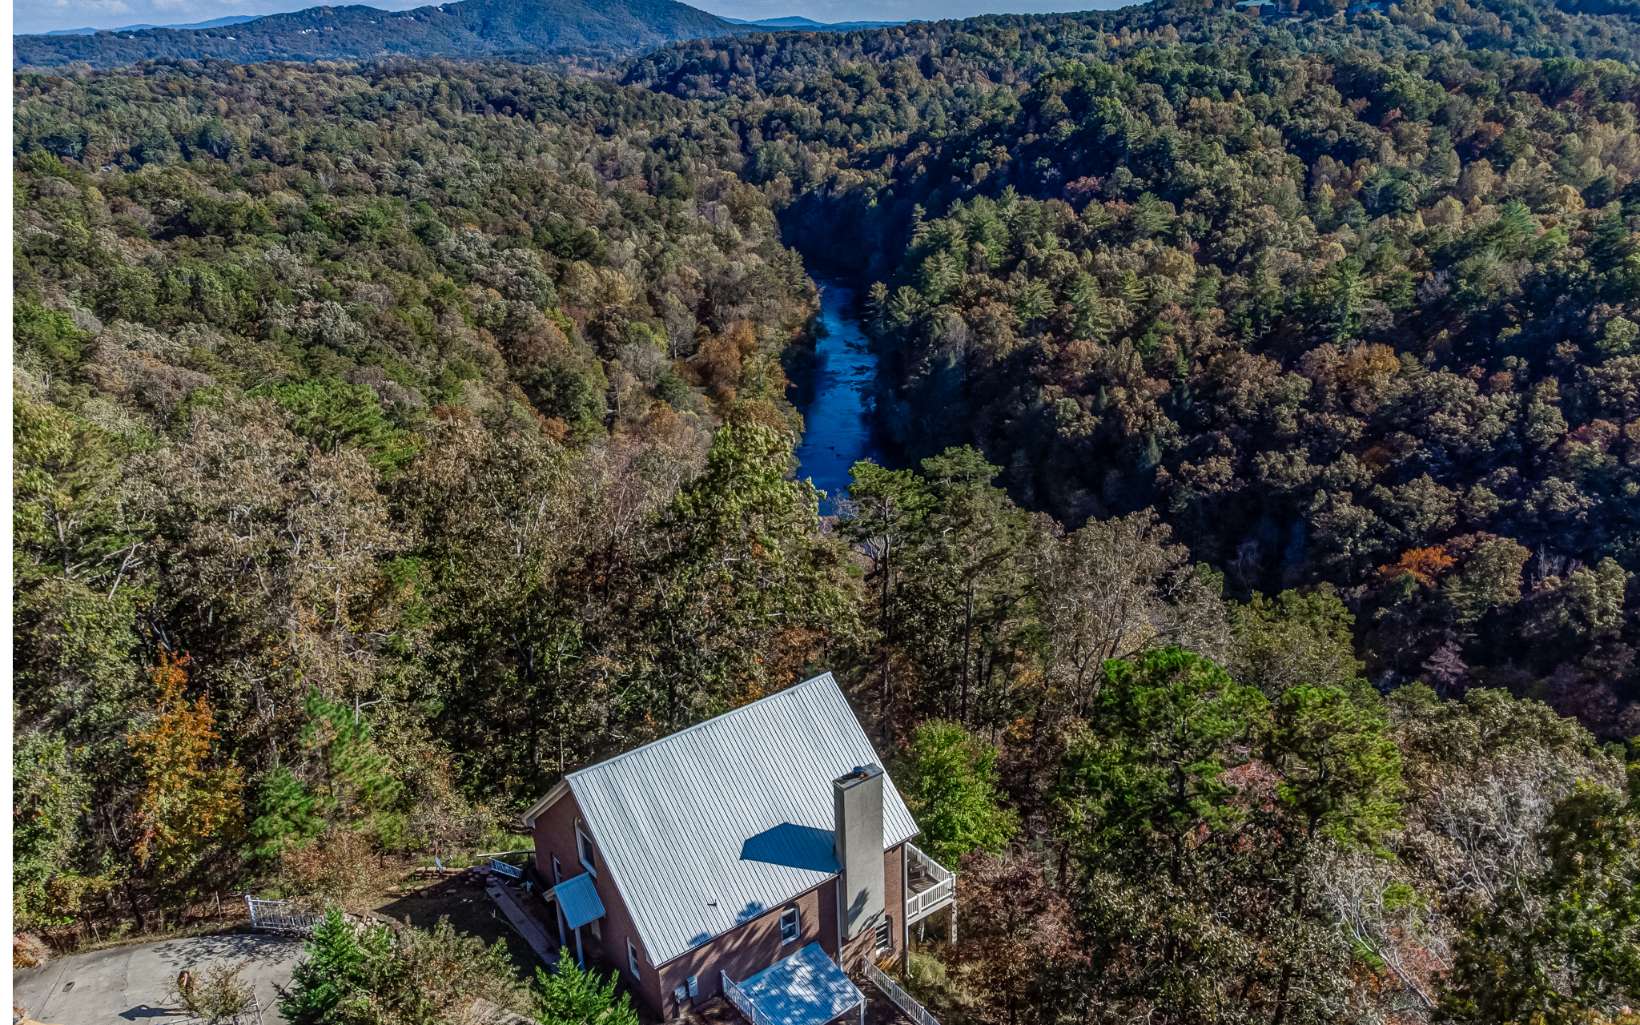 Amazing Long Range Mountain and River View! Rare find in this area! You can even hear sounds of the river when sitting on your deck or even inside with the door open! Low Maintenance brick home on 1.03 acres. 4 bedrooms and 4 full bathrooms. 3 masters total in this home with spectacular views on every level. Upstairs offers an additional master with a private sitting area. This home would make an amazing short term rental, full time living or second home. Wood burning fireplace. Sound system throughout house. Central vac and Dual Hvac. Whole house generator. Basement is a perfect mother n law suite with a bedroom, bathroom, living room, large deck, wine cellar/storage area, one car garage and mud room. Concrete driveway and located on a paved road. Plenty of storage. Located in the beautiful Coosawattee River Resort with amenities: River access, 3 pools(one indoor), fitness center, mini golf, playgrounds, basketball/tennis courts, gated entrance. Located close to many wineries.